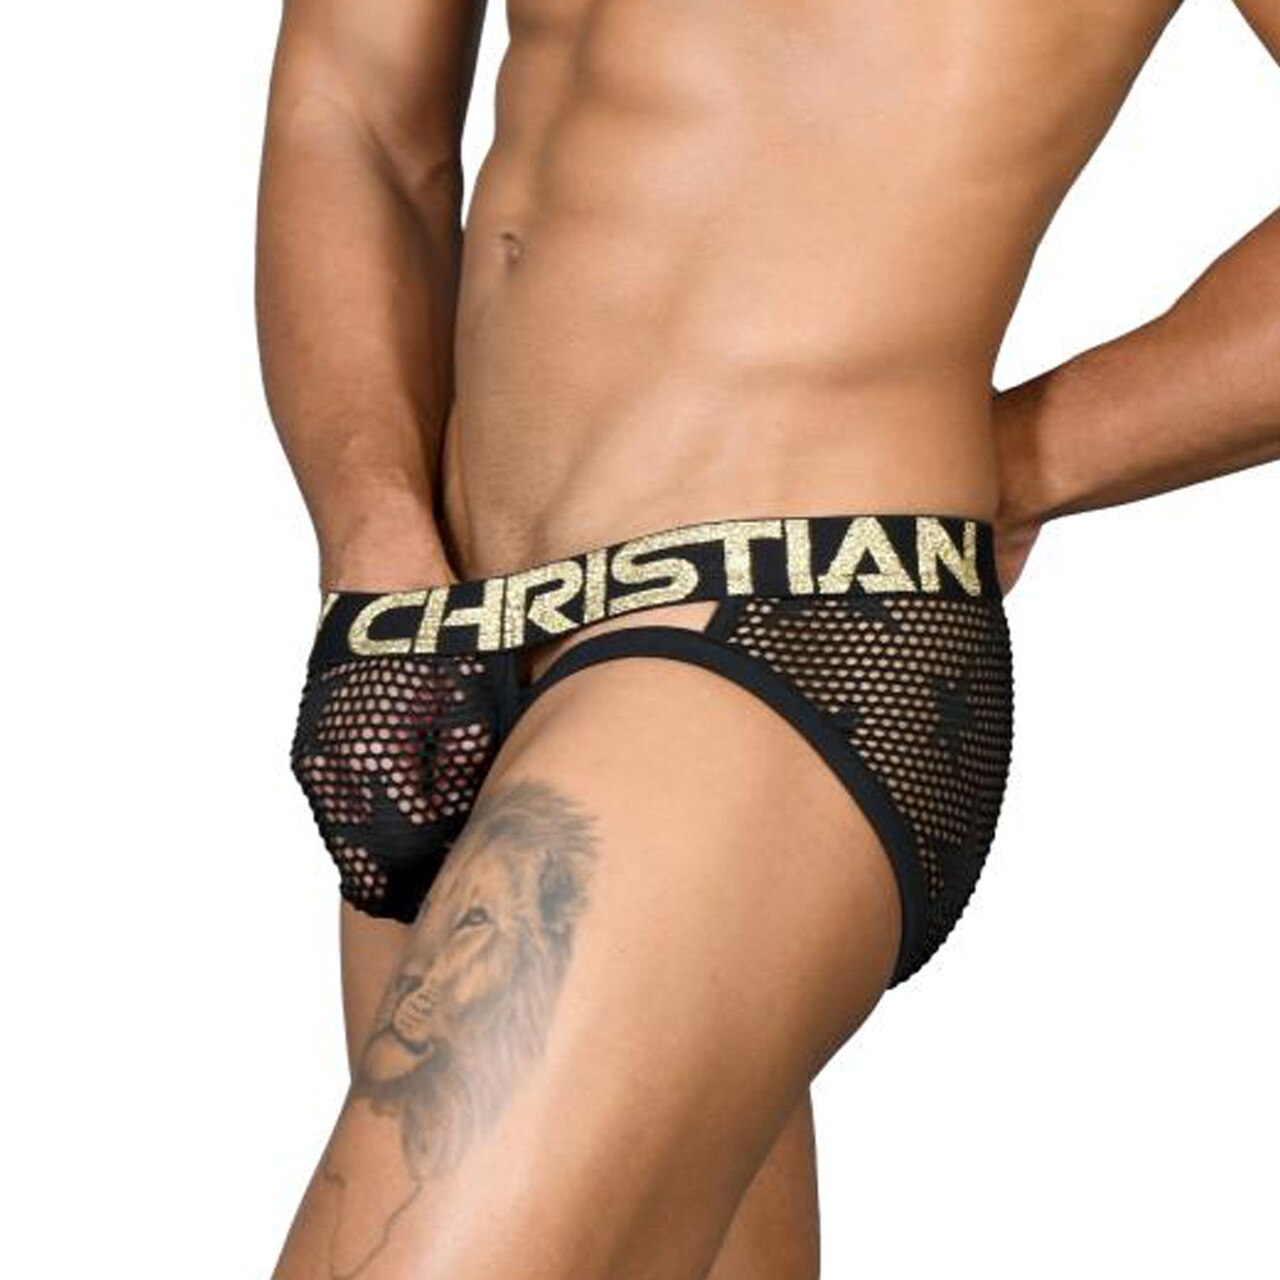 SALE - Mens Andrew Christian Star Mesh Bondage Brief w/ Almost Naked